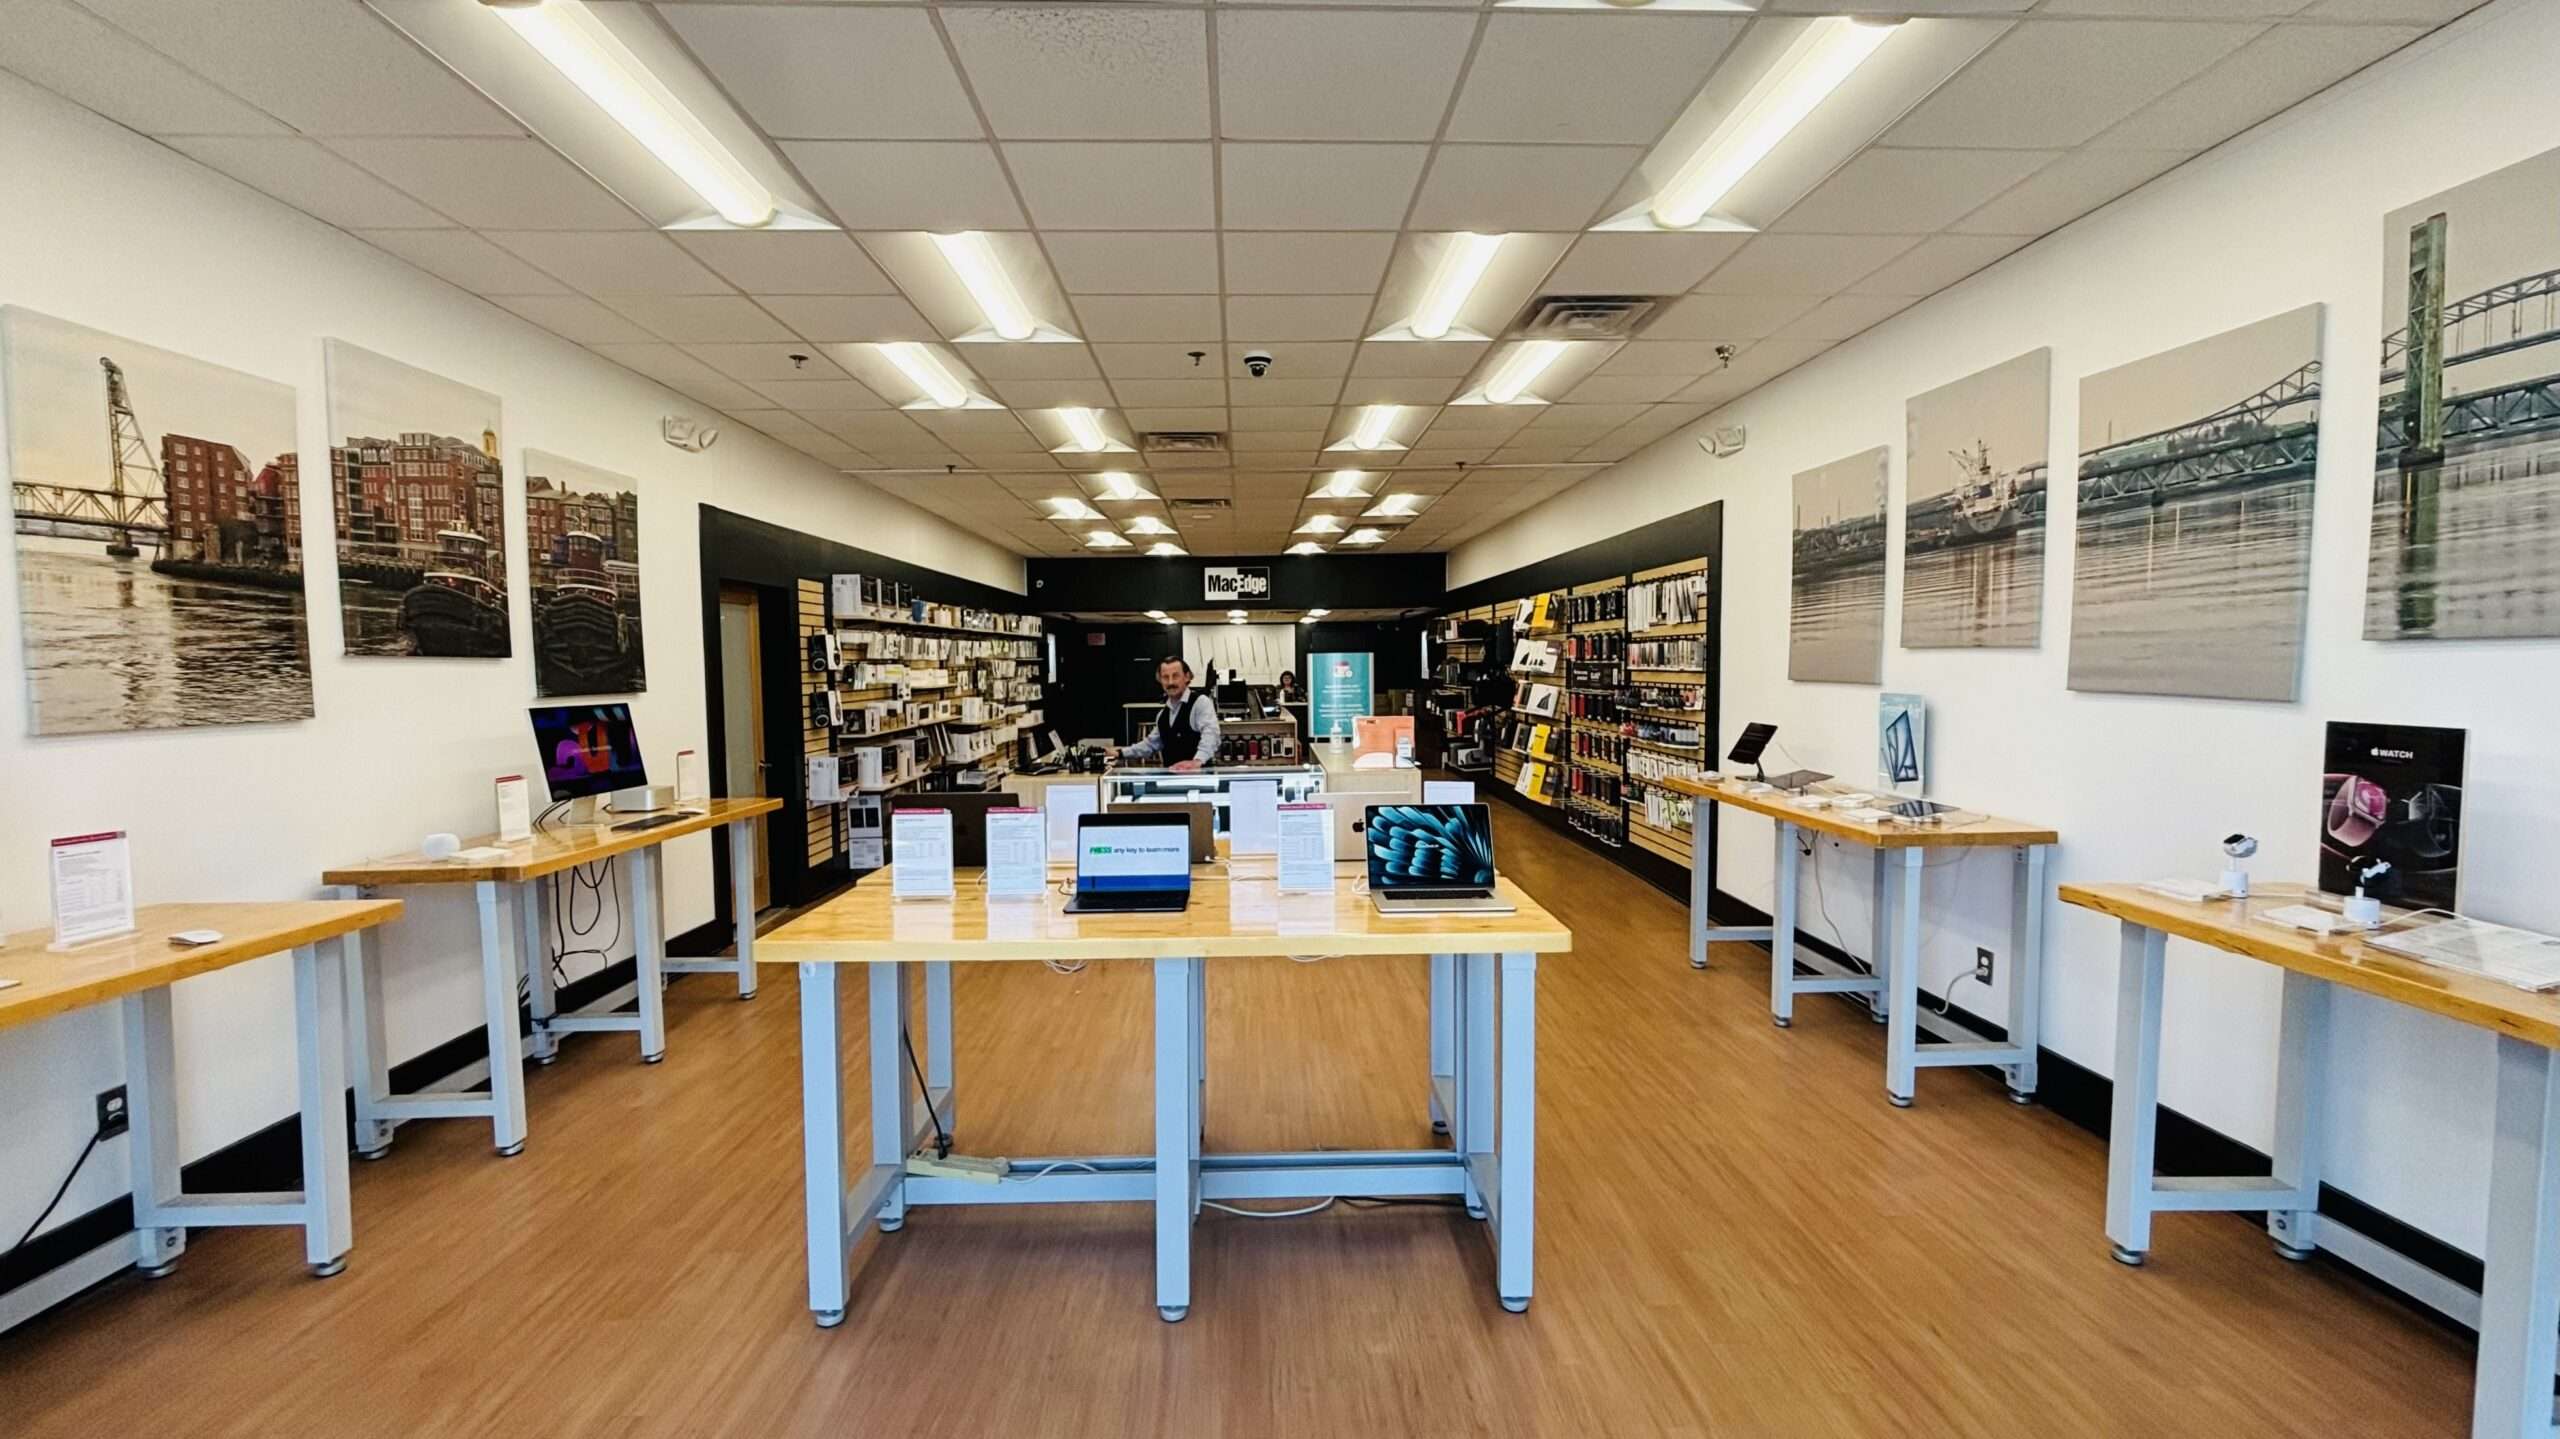 MacEdge sells repairs iPhone, Mac, and other Apple Products in Portsmouth, NH